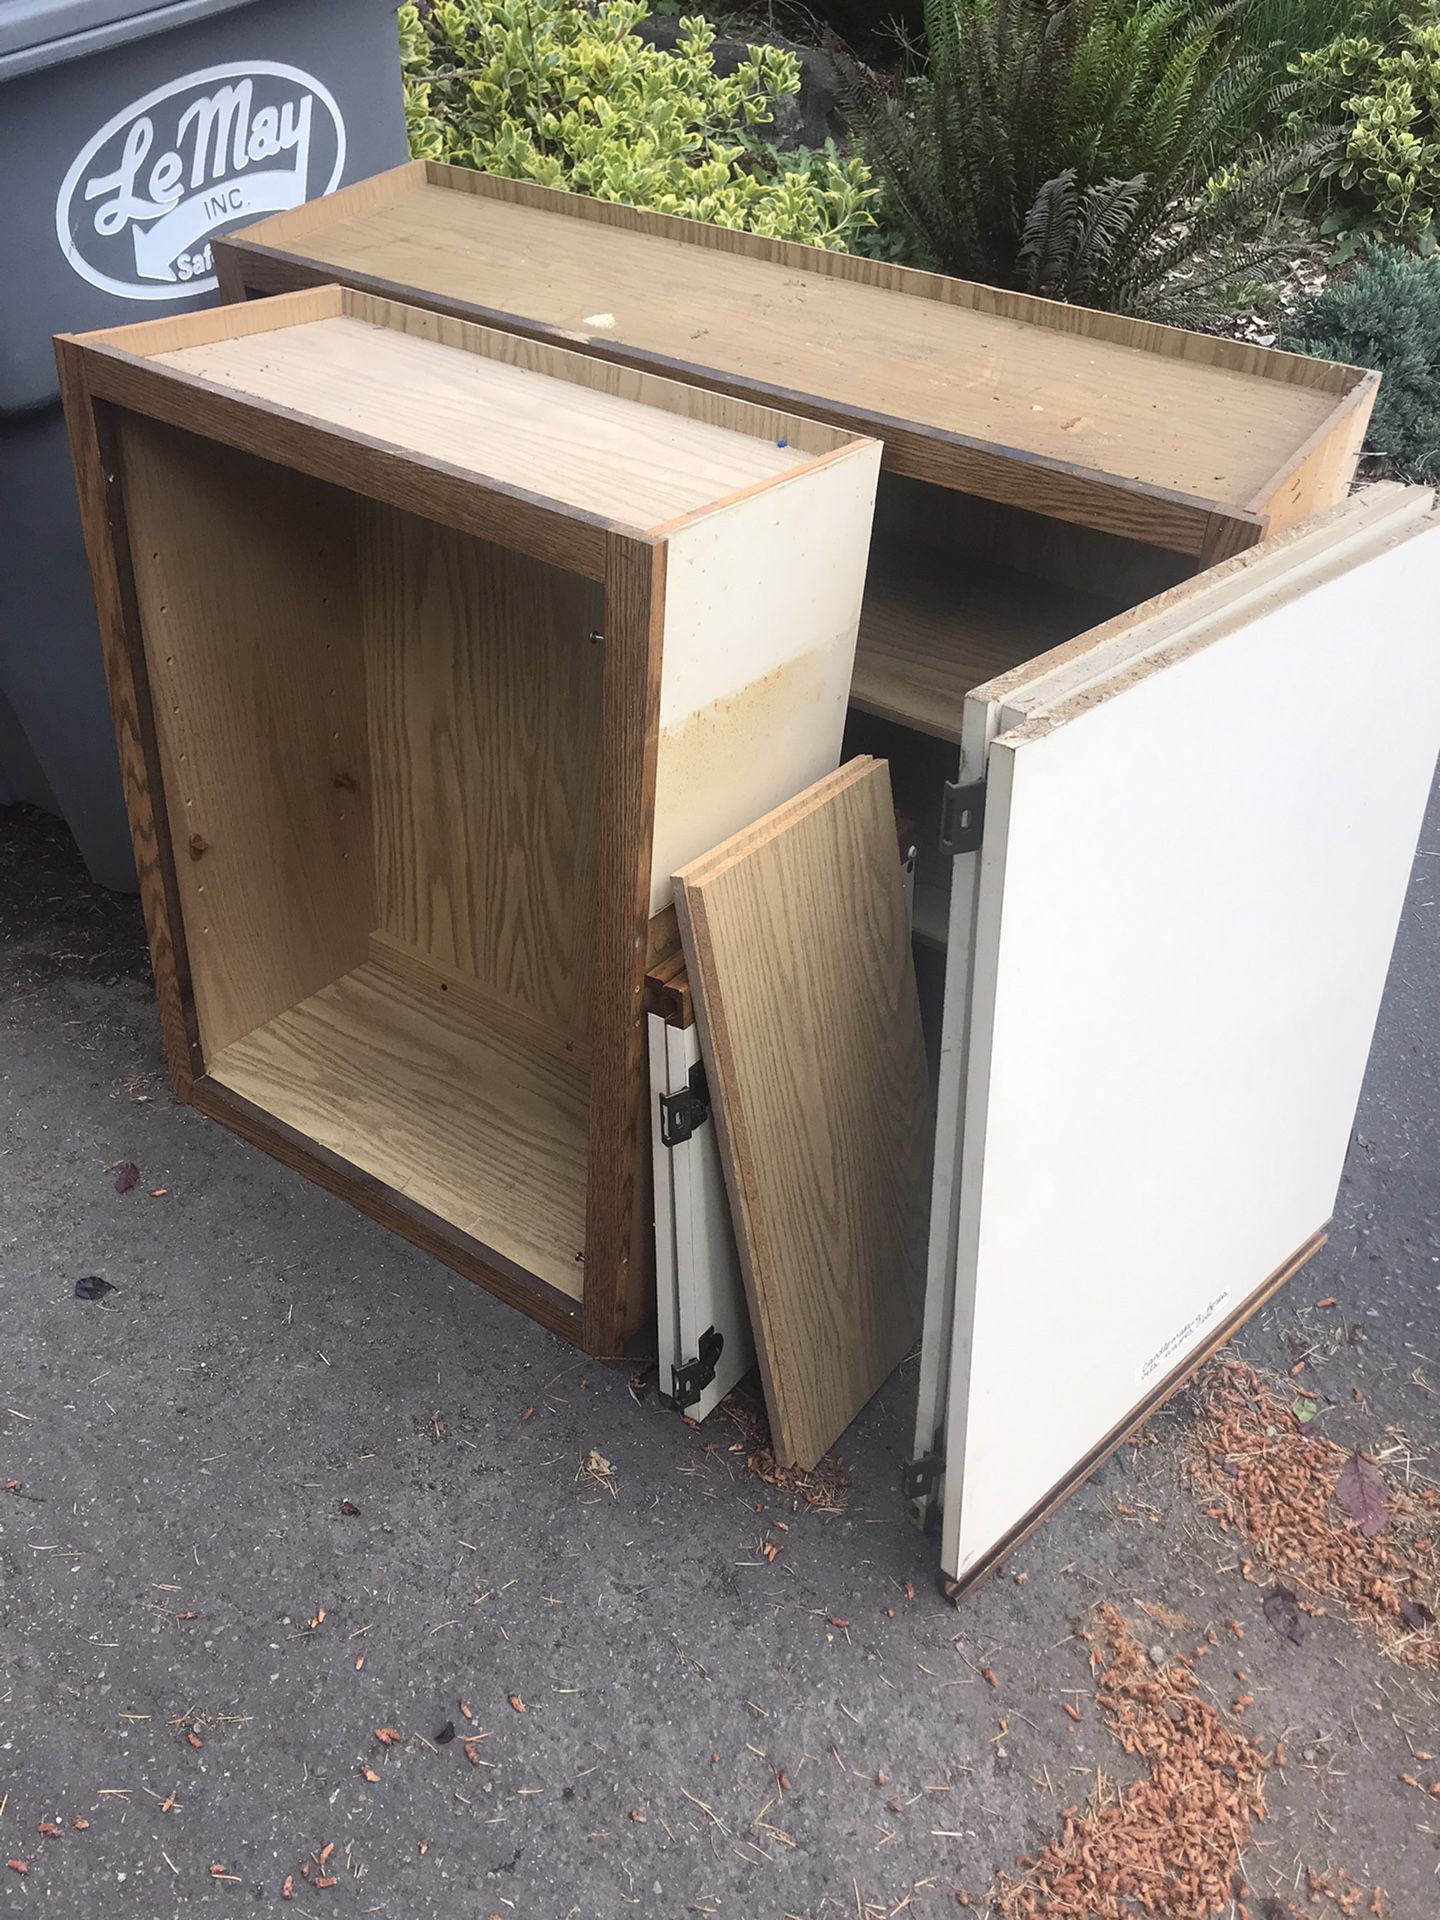 CURB ALERT! Free kitchen cabinet with all hardware included.